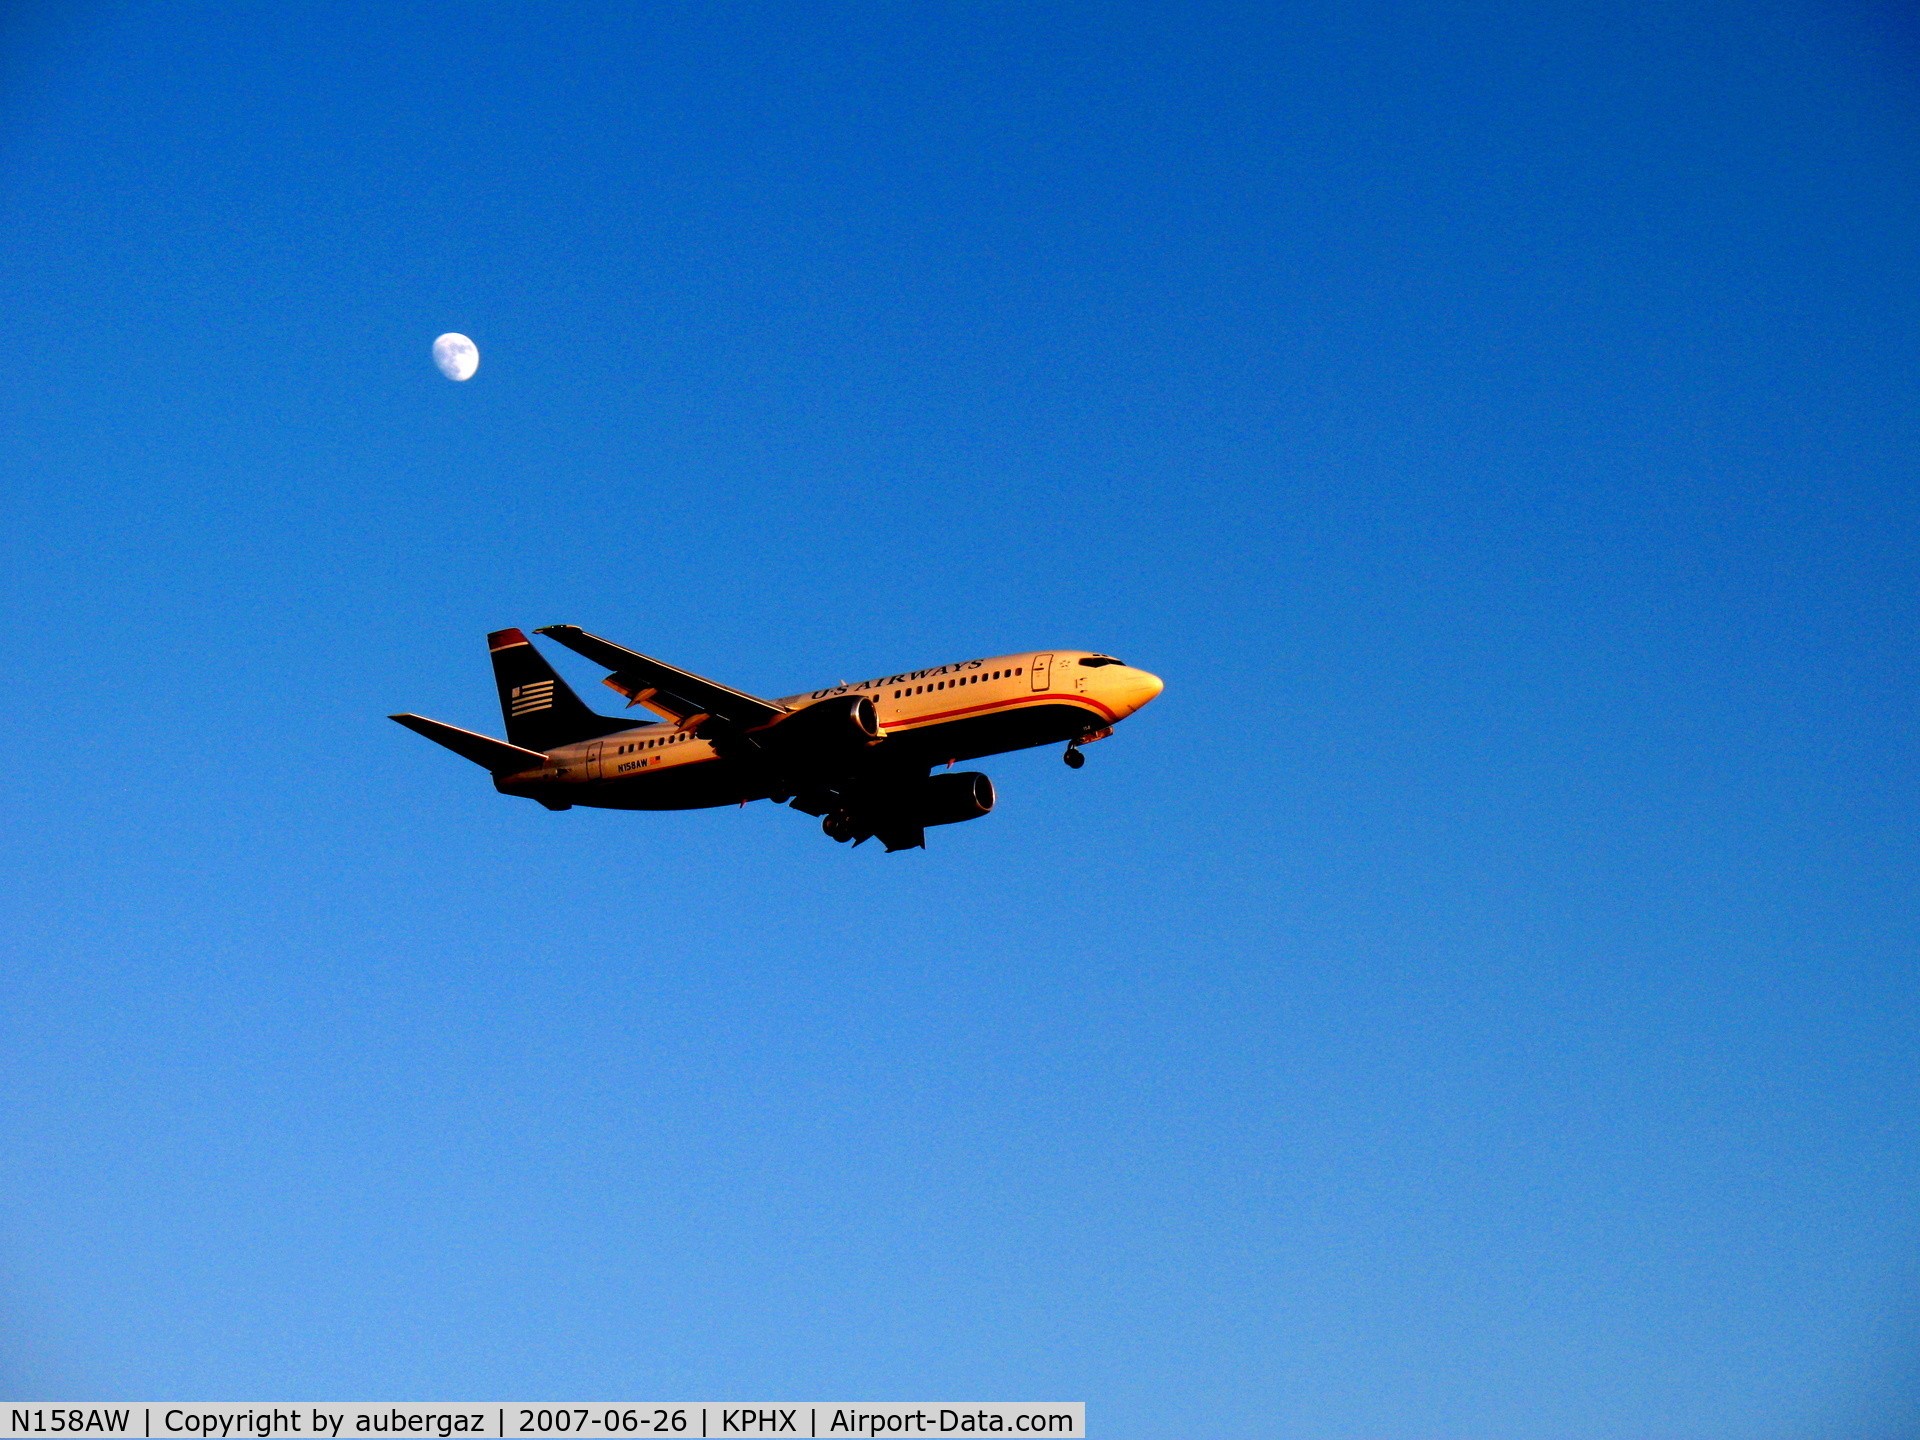 N158AW, 1987 Boeing 737-3G7 C/N 23780, PHX takeoff by a summer moon